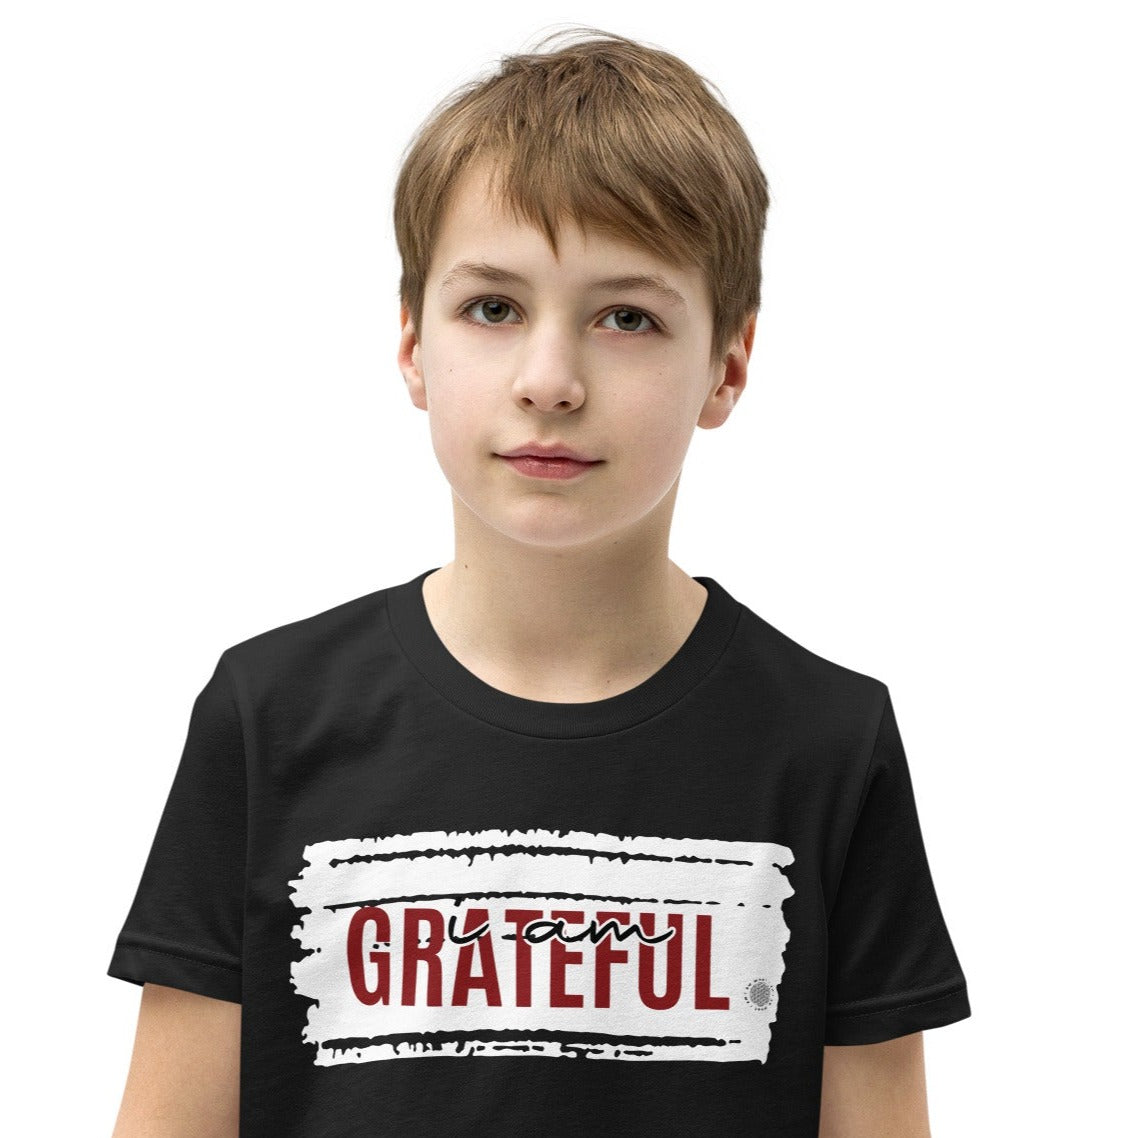 Our ‘I Am Grateful’ affirmation youth t-shirt describes how thankful your son or daughter is for mom and dad bringing world. Your child is so appreciative for every trip to soccer practice or music class you do.